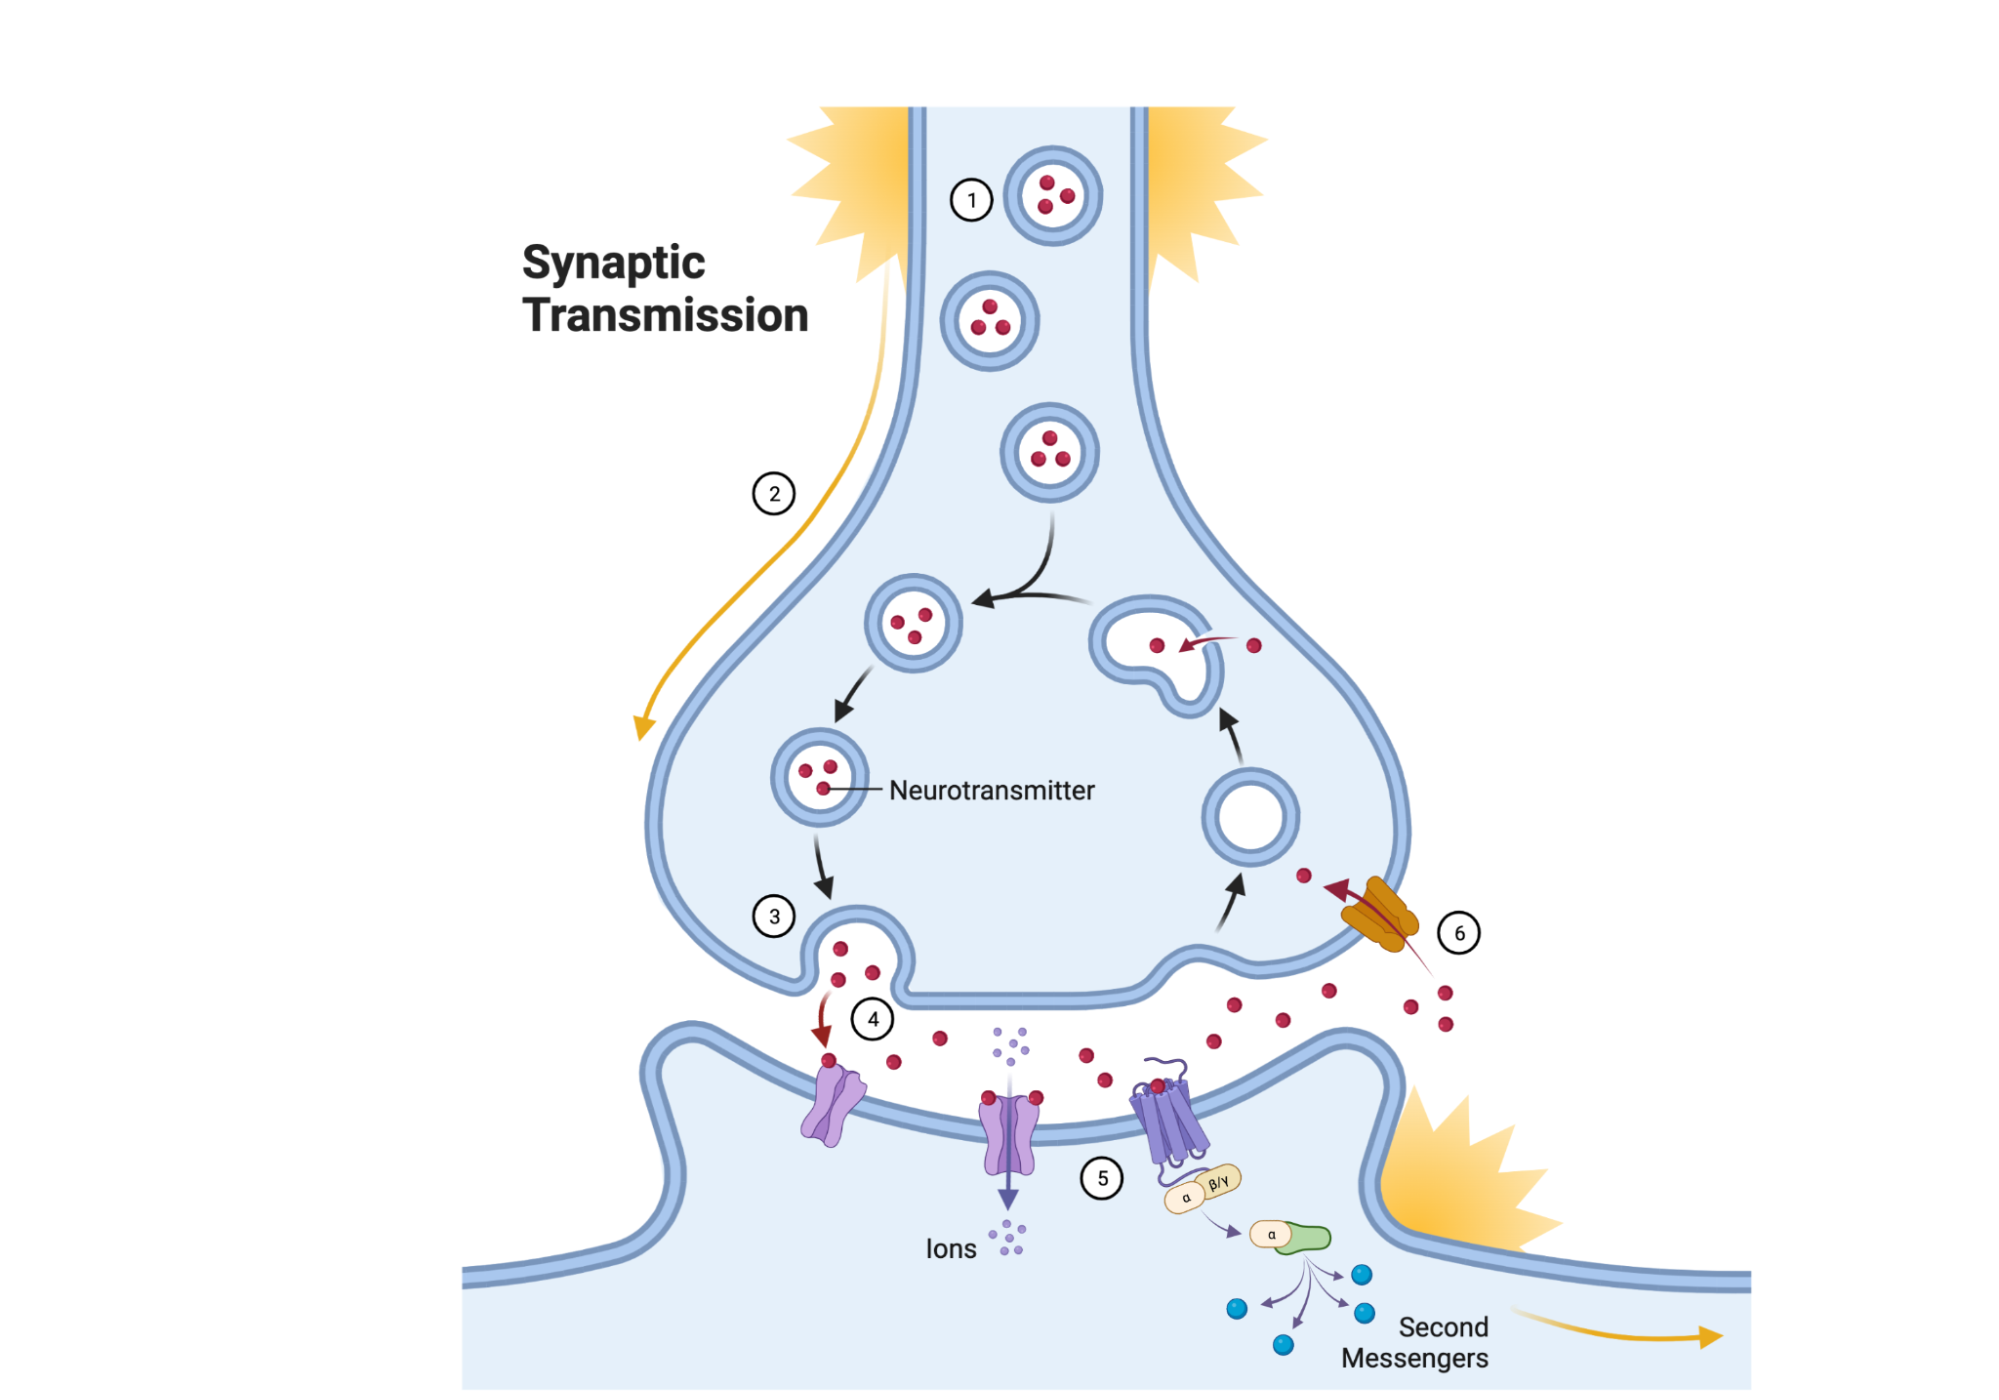 Each of the 5 stages of neurotransmission discussed in the text above is shown in this view inside a presynaptic axon terminal, where neurotransmitter is being released from vesicles, binding to receptors, and is moved back into the presynaptic cell via reuptake transporters.